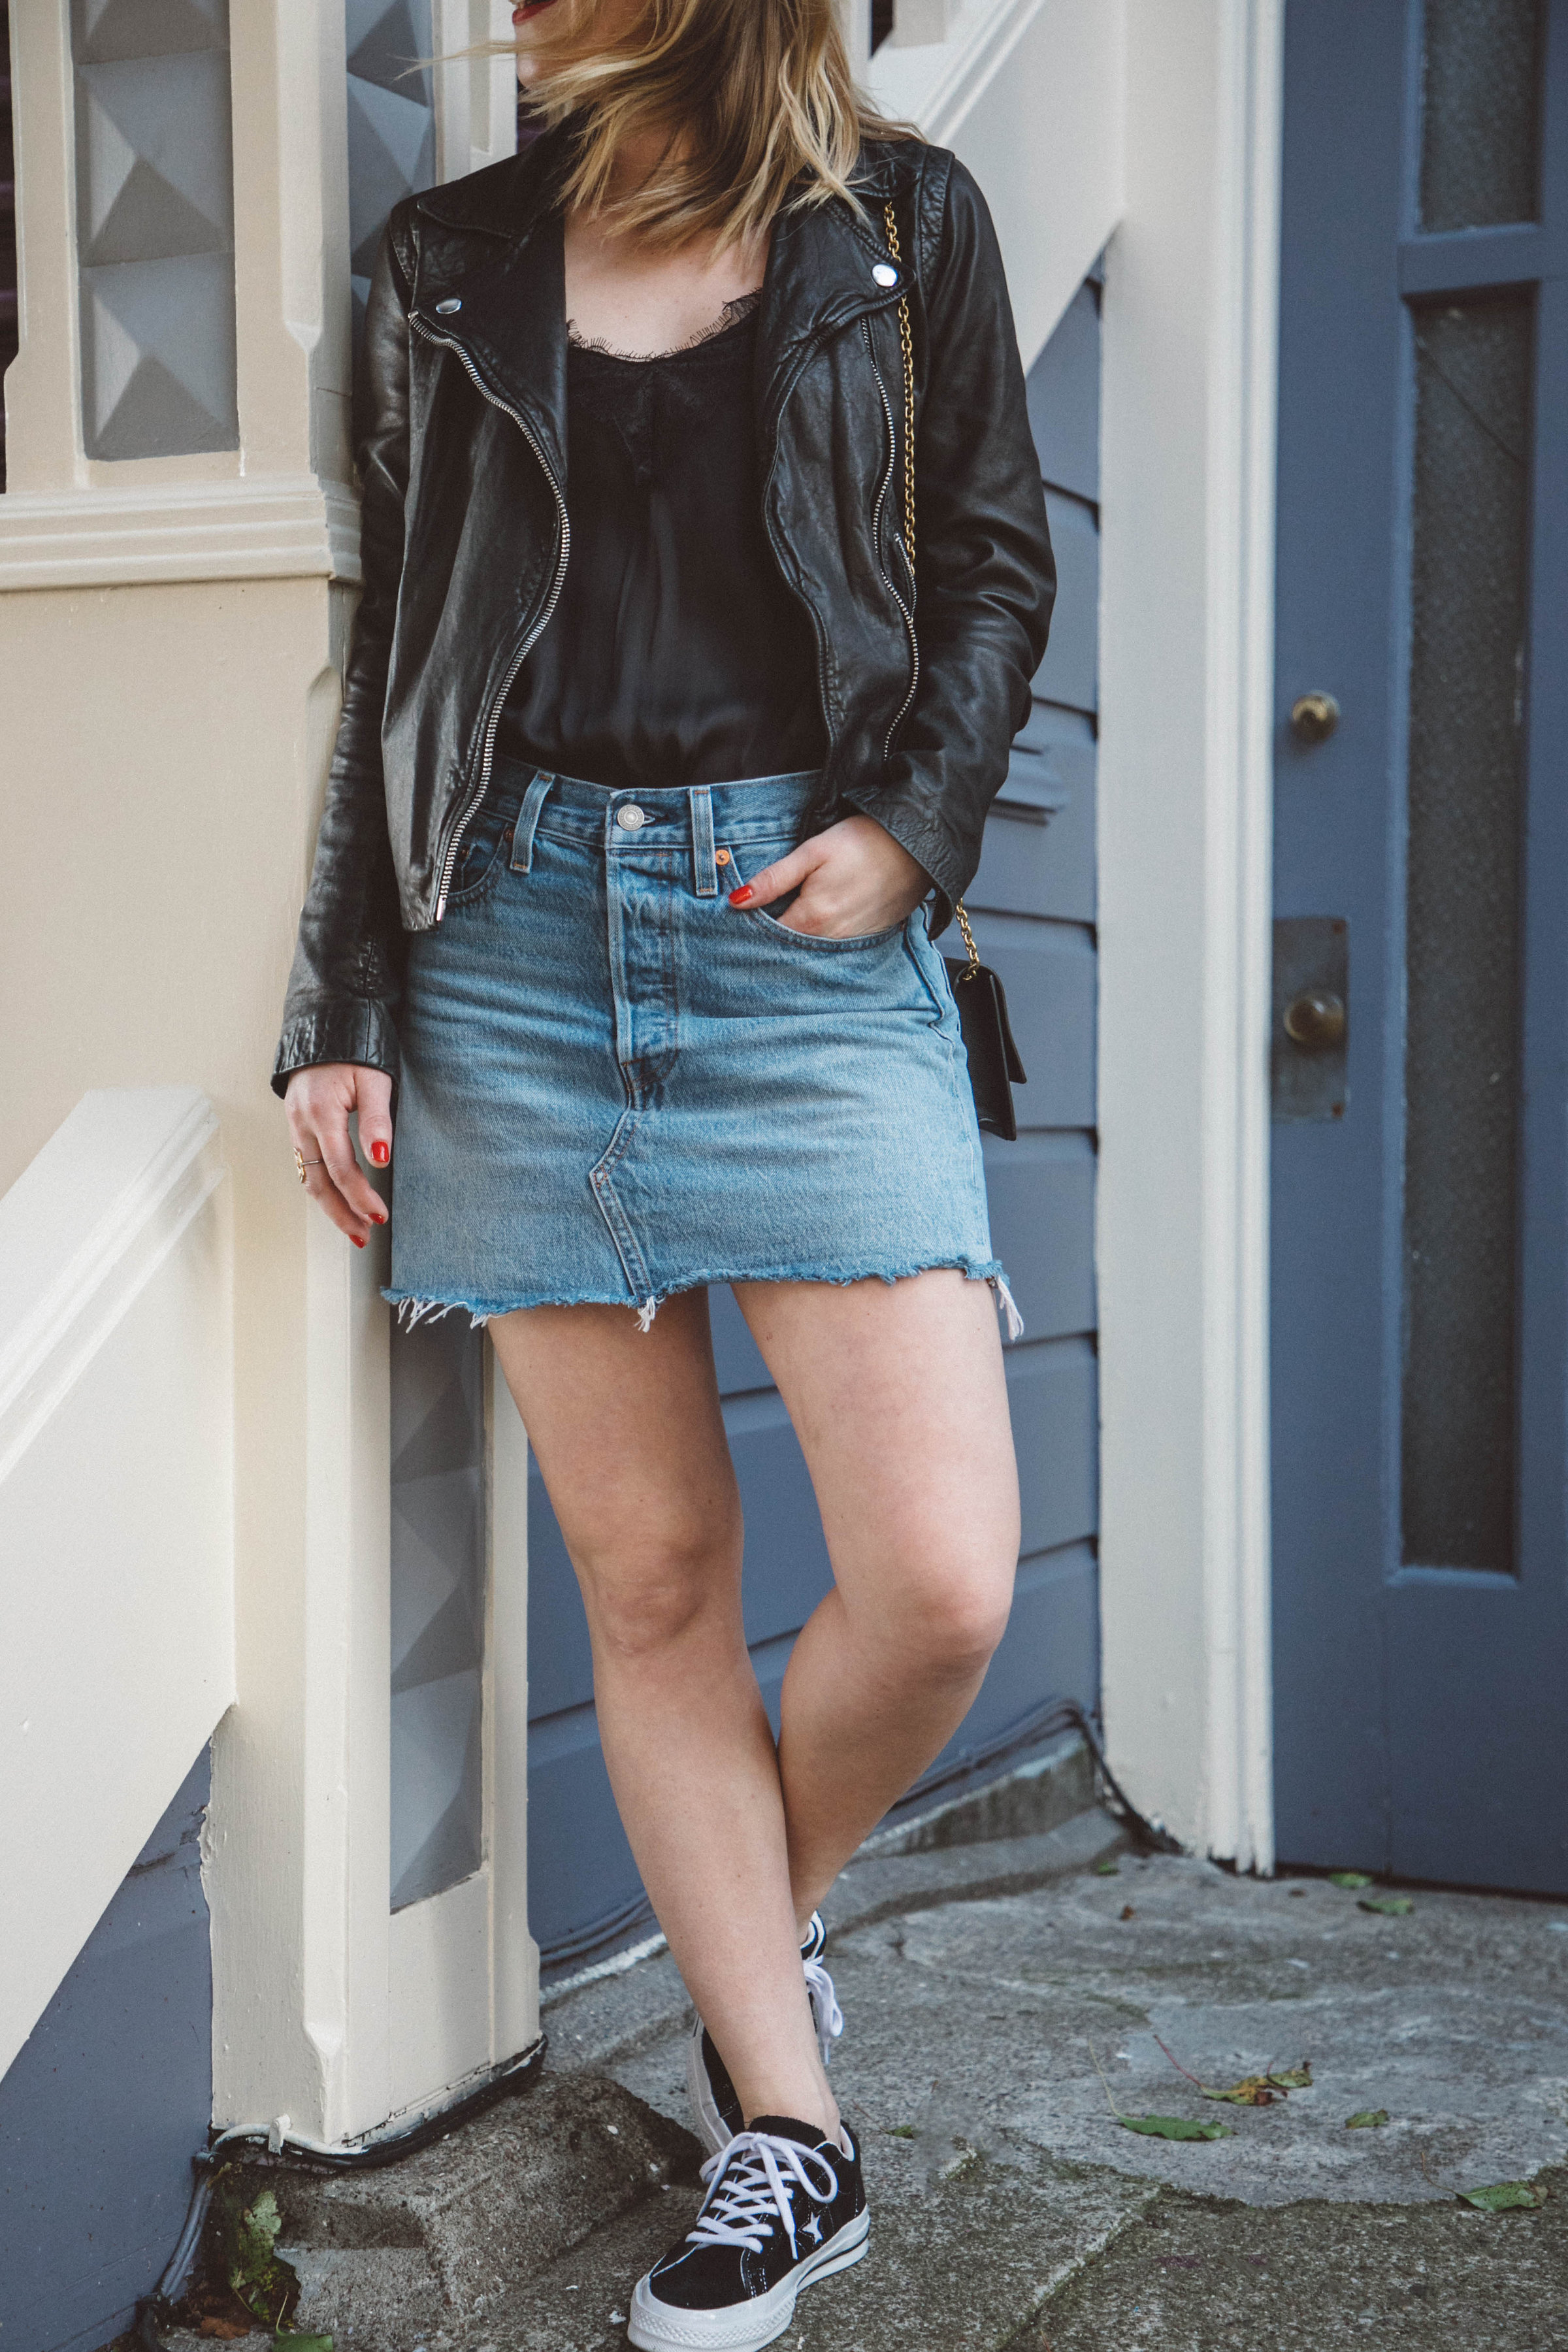 Bringing Back the Denim Skirt // Levi's Denim Skirt paired with a H&M Satin Lace Cami and Madewell Moto Jacket.